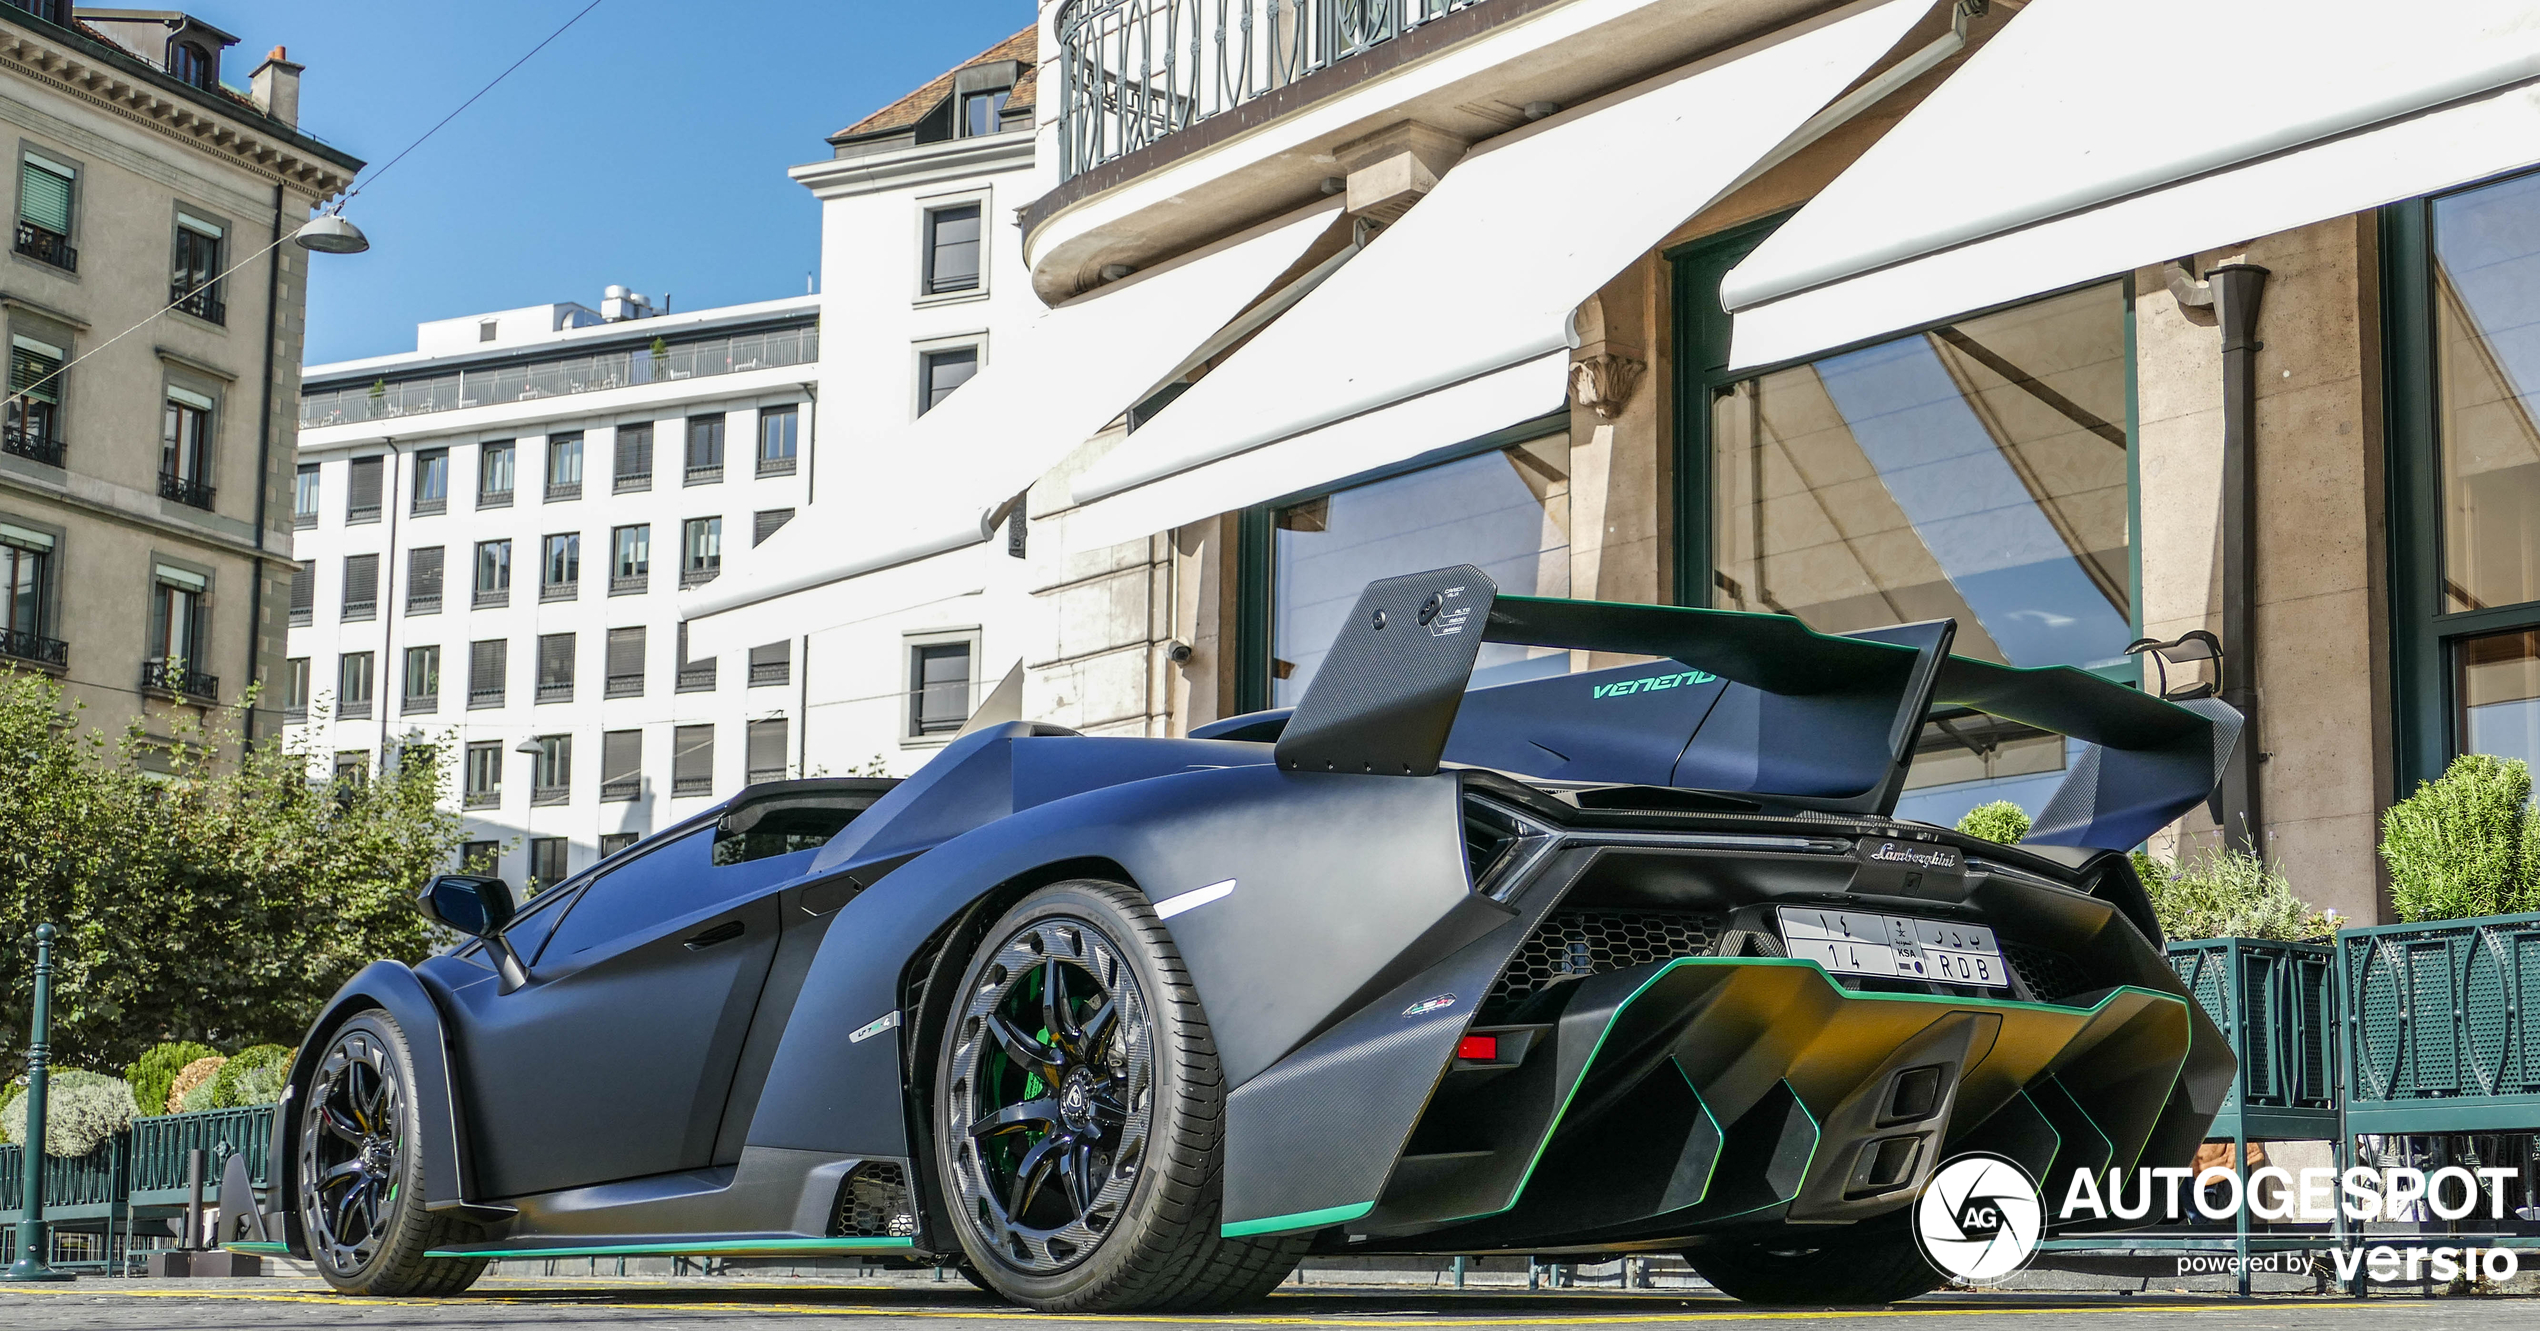 Four years have passed since the appearance of the Veneno in Geneva.